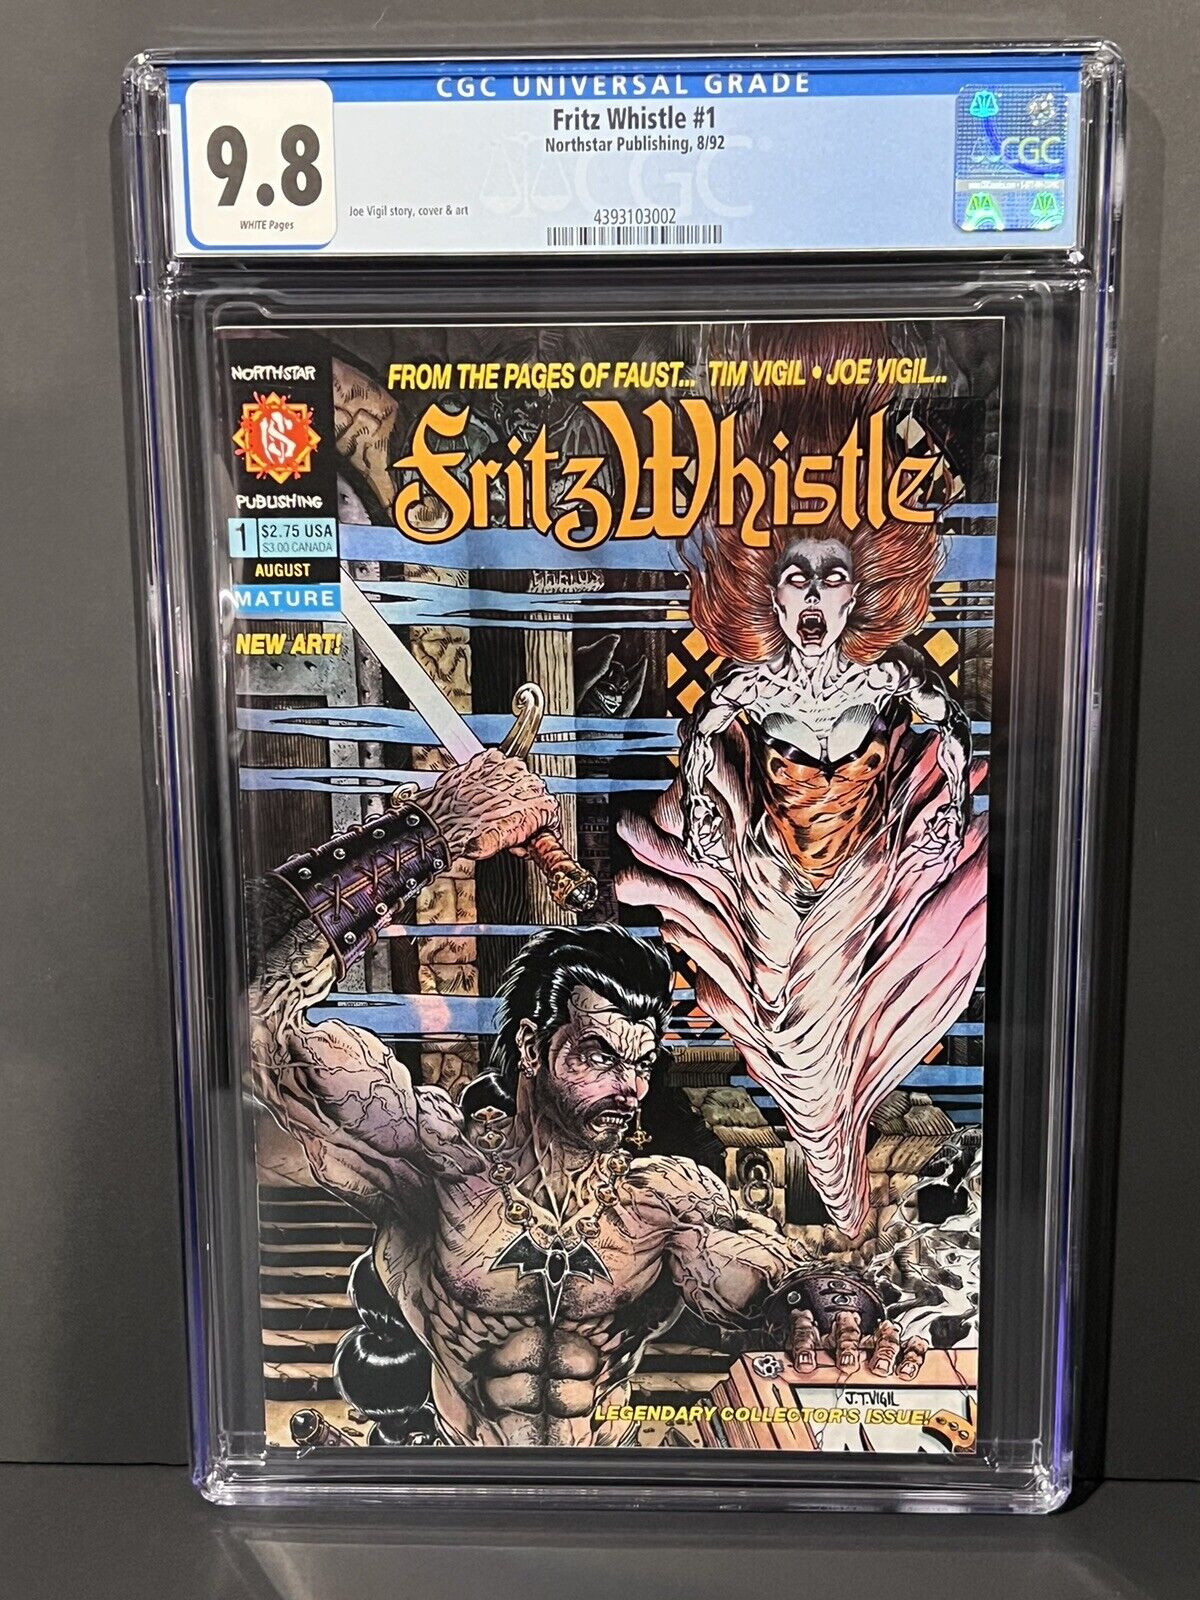 Fritz Whistle #1 - CGC 9.8 White - 1 of 2 in census - Faust - 1992 - Northstar